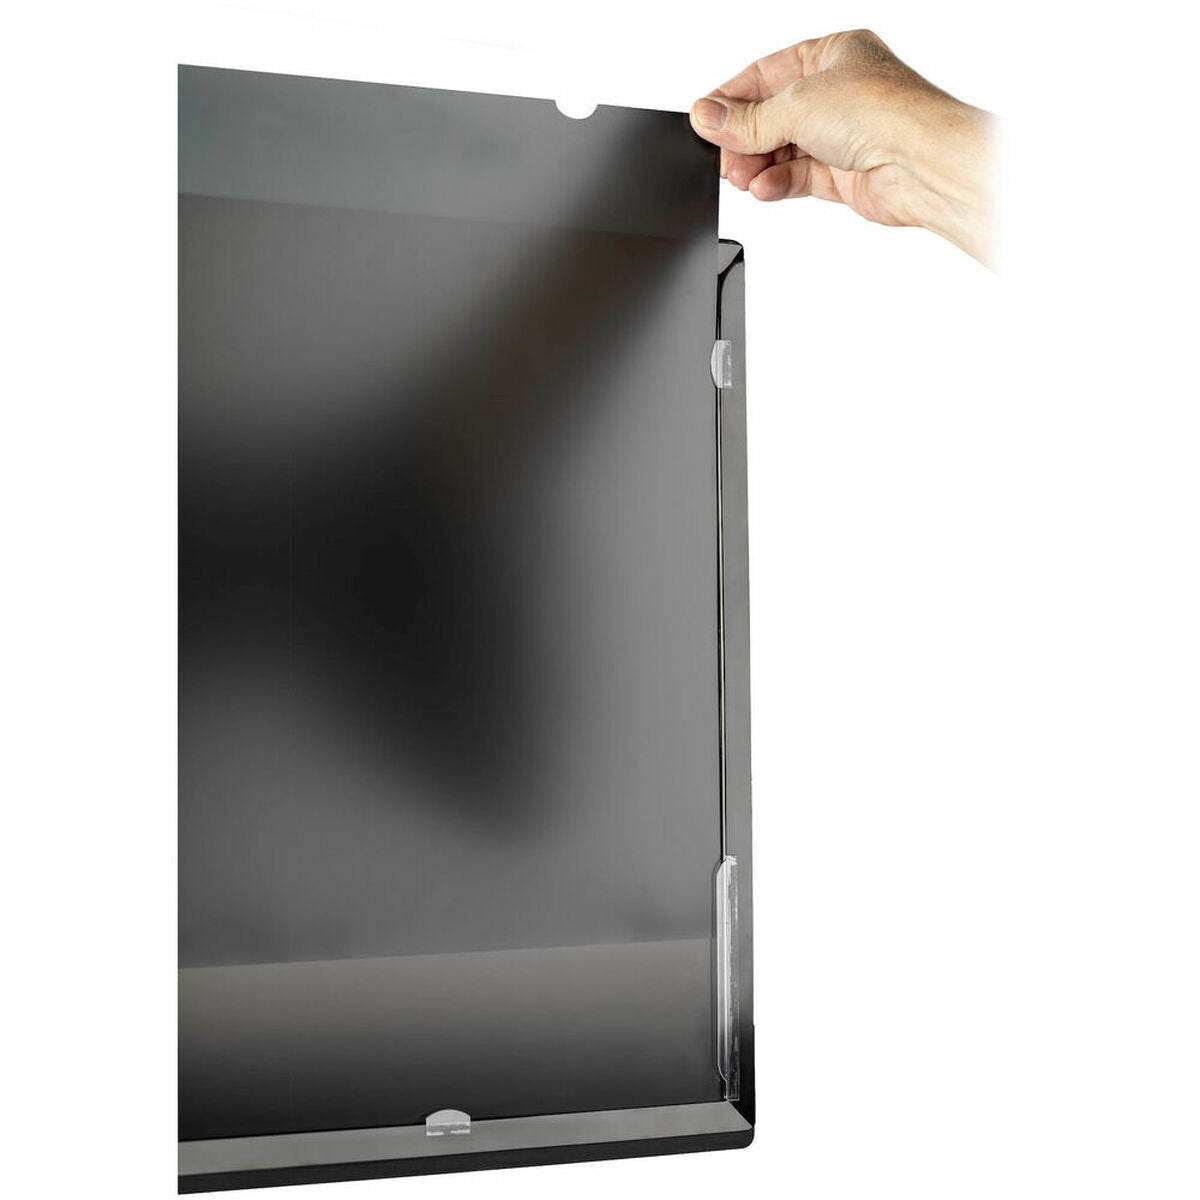 Privacy Filter for Monitor Startech PRIVACY-SCREEN-238M, Startech, Computing, Accessories, privacy-filter-for-monitor-startech-privacy-screen-238m, Brand_Startech, category-reference-2609, category-reference-2642, category-reference-2644, category-reference-t-19685, category-reference-t-19908, category-reference-t-21342, computers / peripherals, Condition_NEW, office, Price_100 - 200, Teleworking, RiotNook